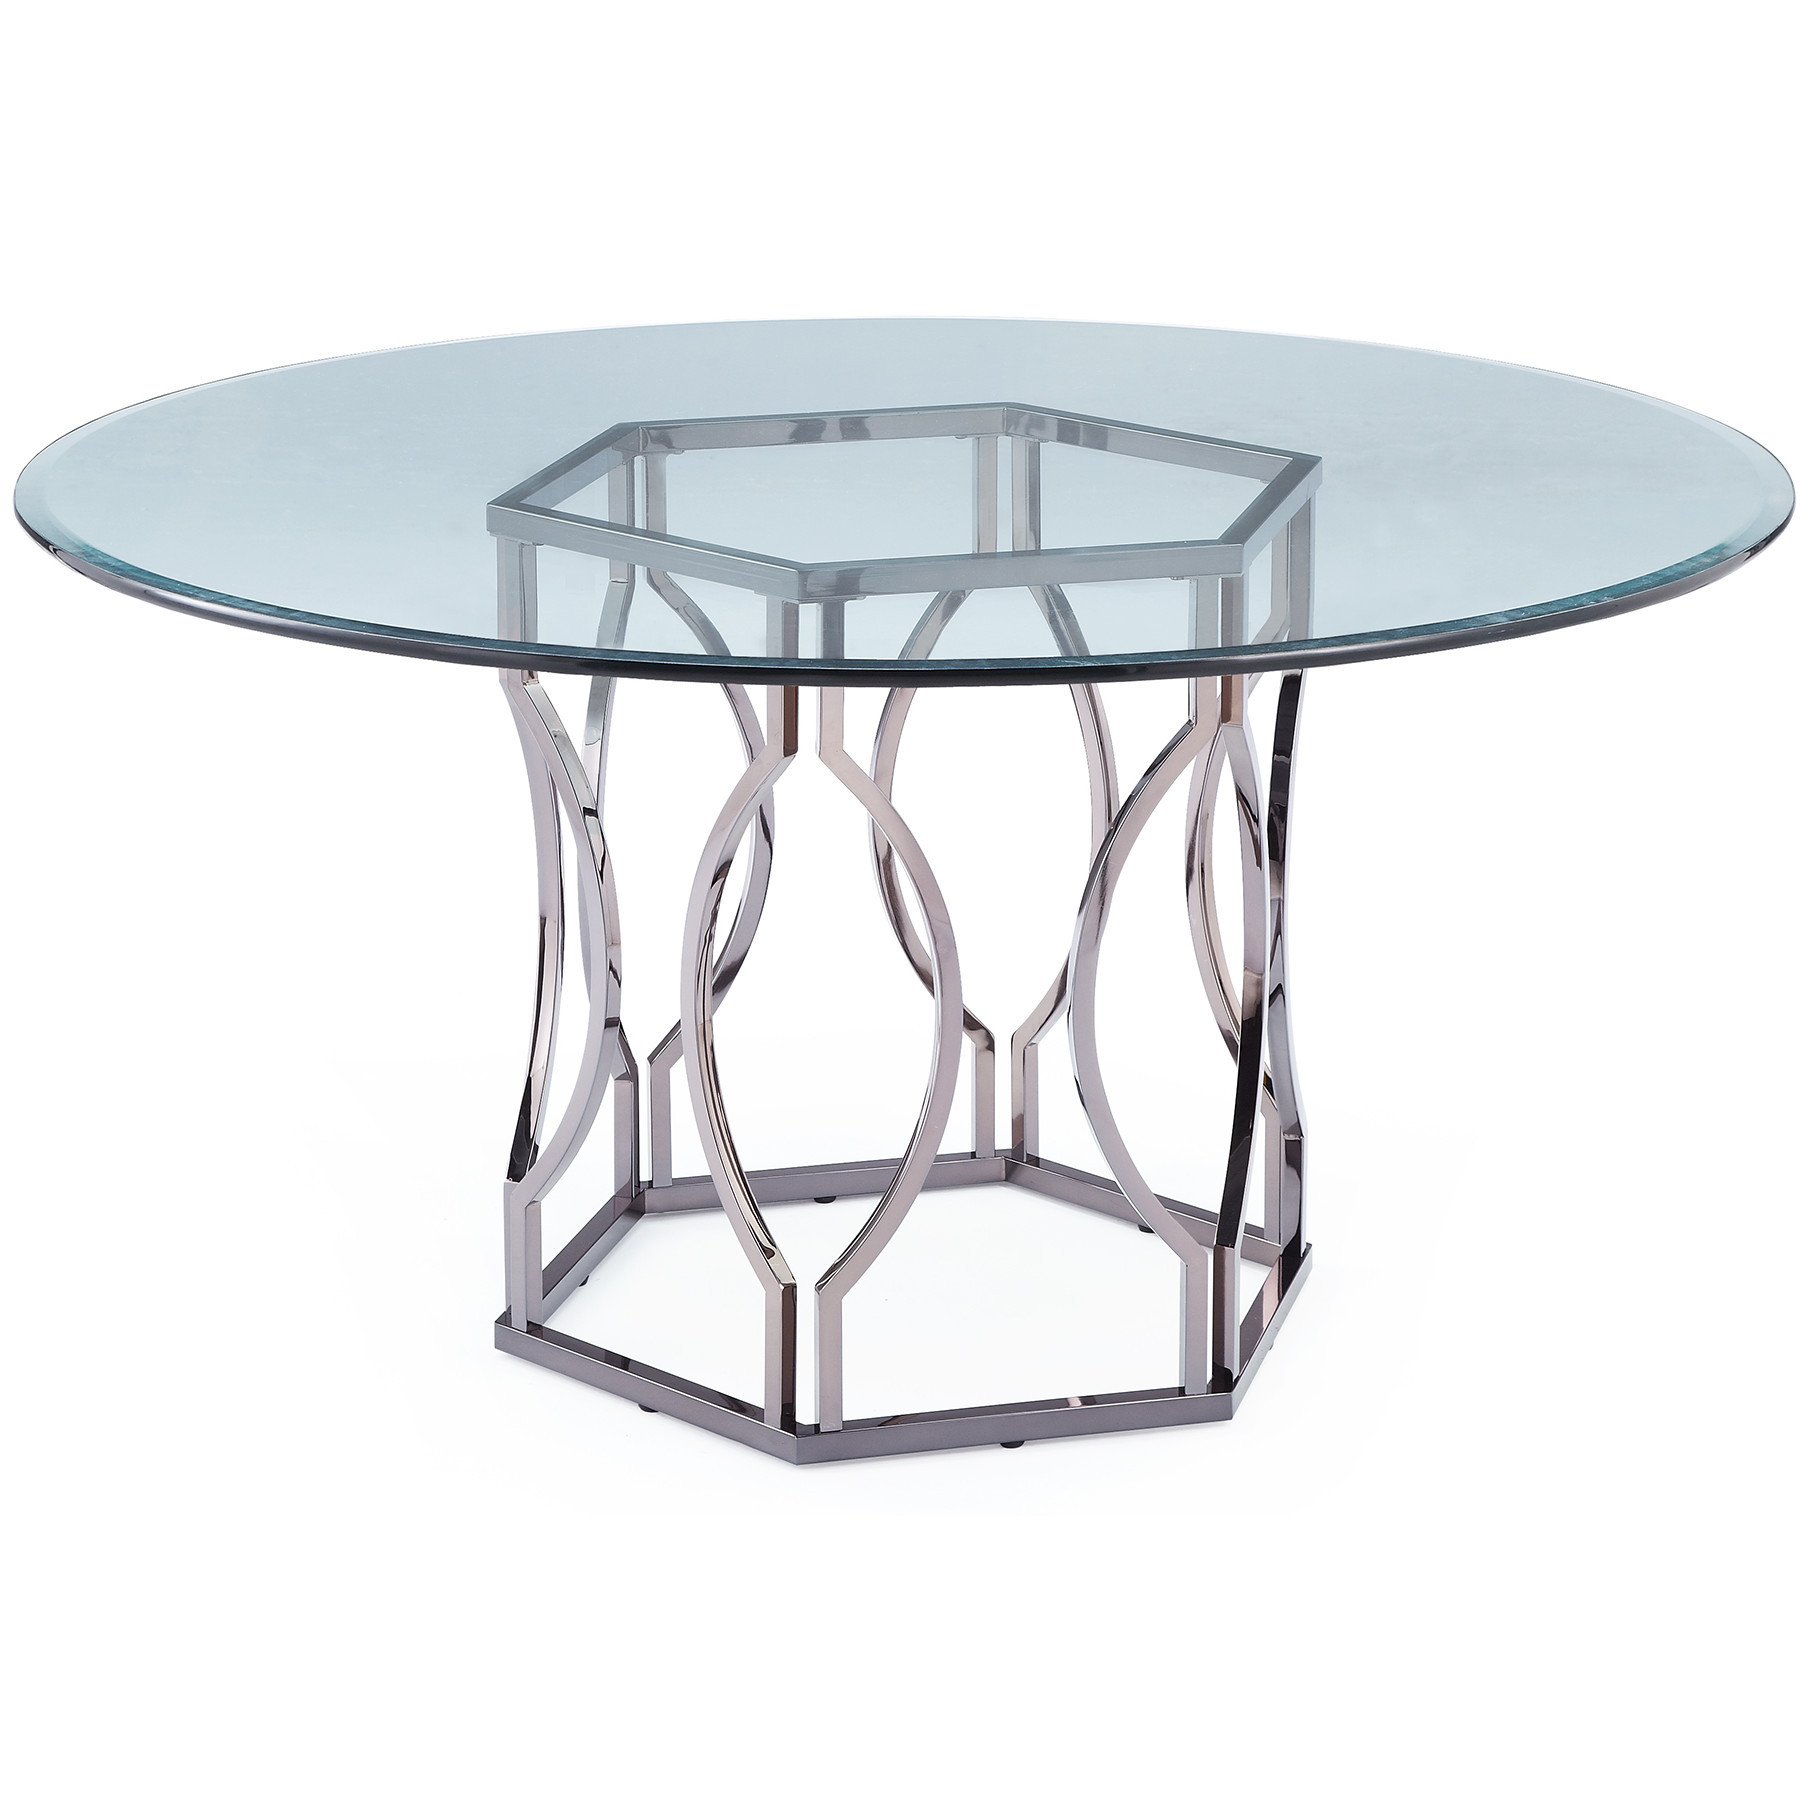 Best ideas about Round Glass Dining Table
. Save or Pin Mercer41 Viggo Round Glass Dining Table & Reviews Now.